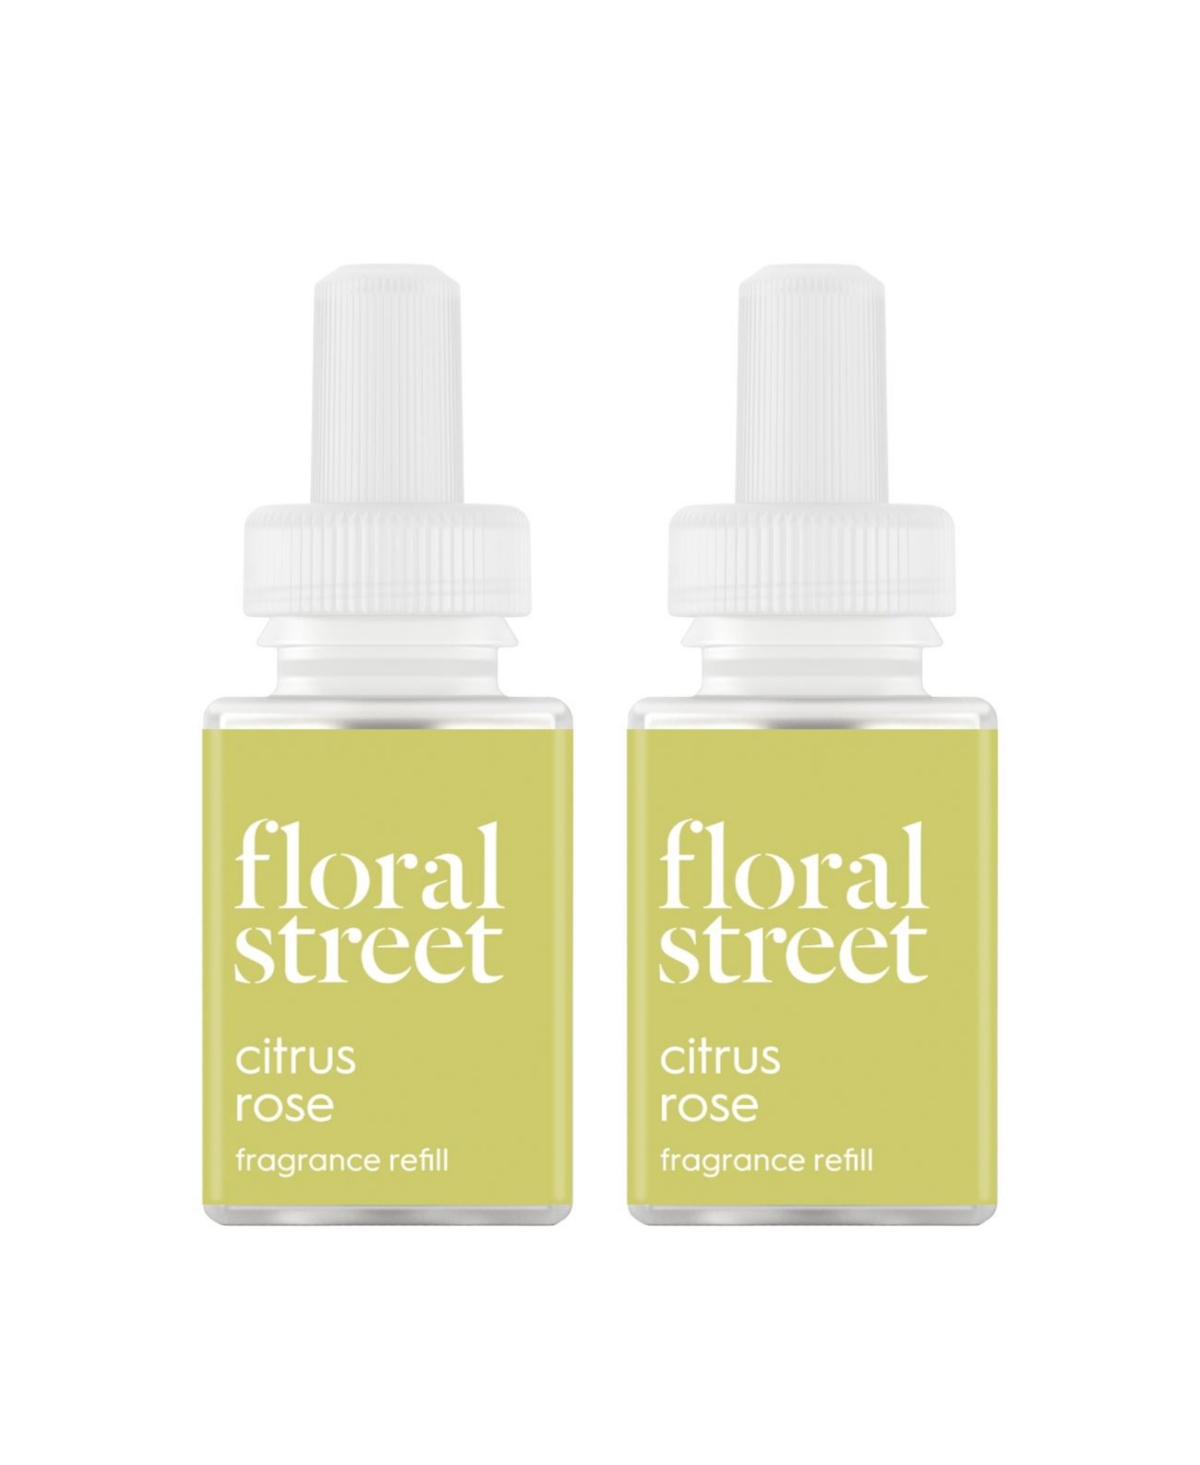 and Floral Street - Citrus Rose - Fragrance for Smart Home Air Diffusers - Room Freshener - Aromatherapy Scents for Bedrooms & Living Rooms - 2 P